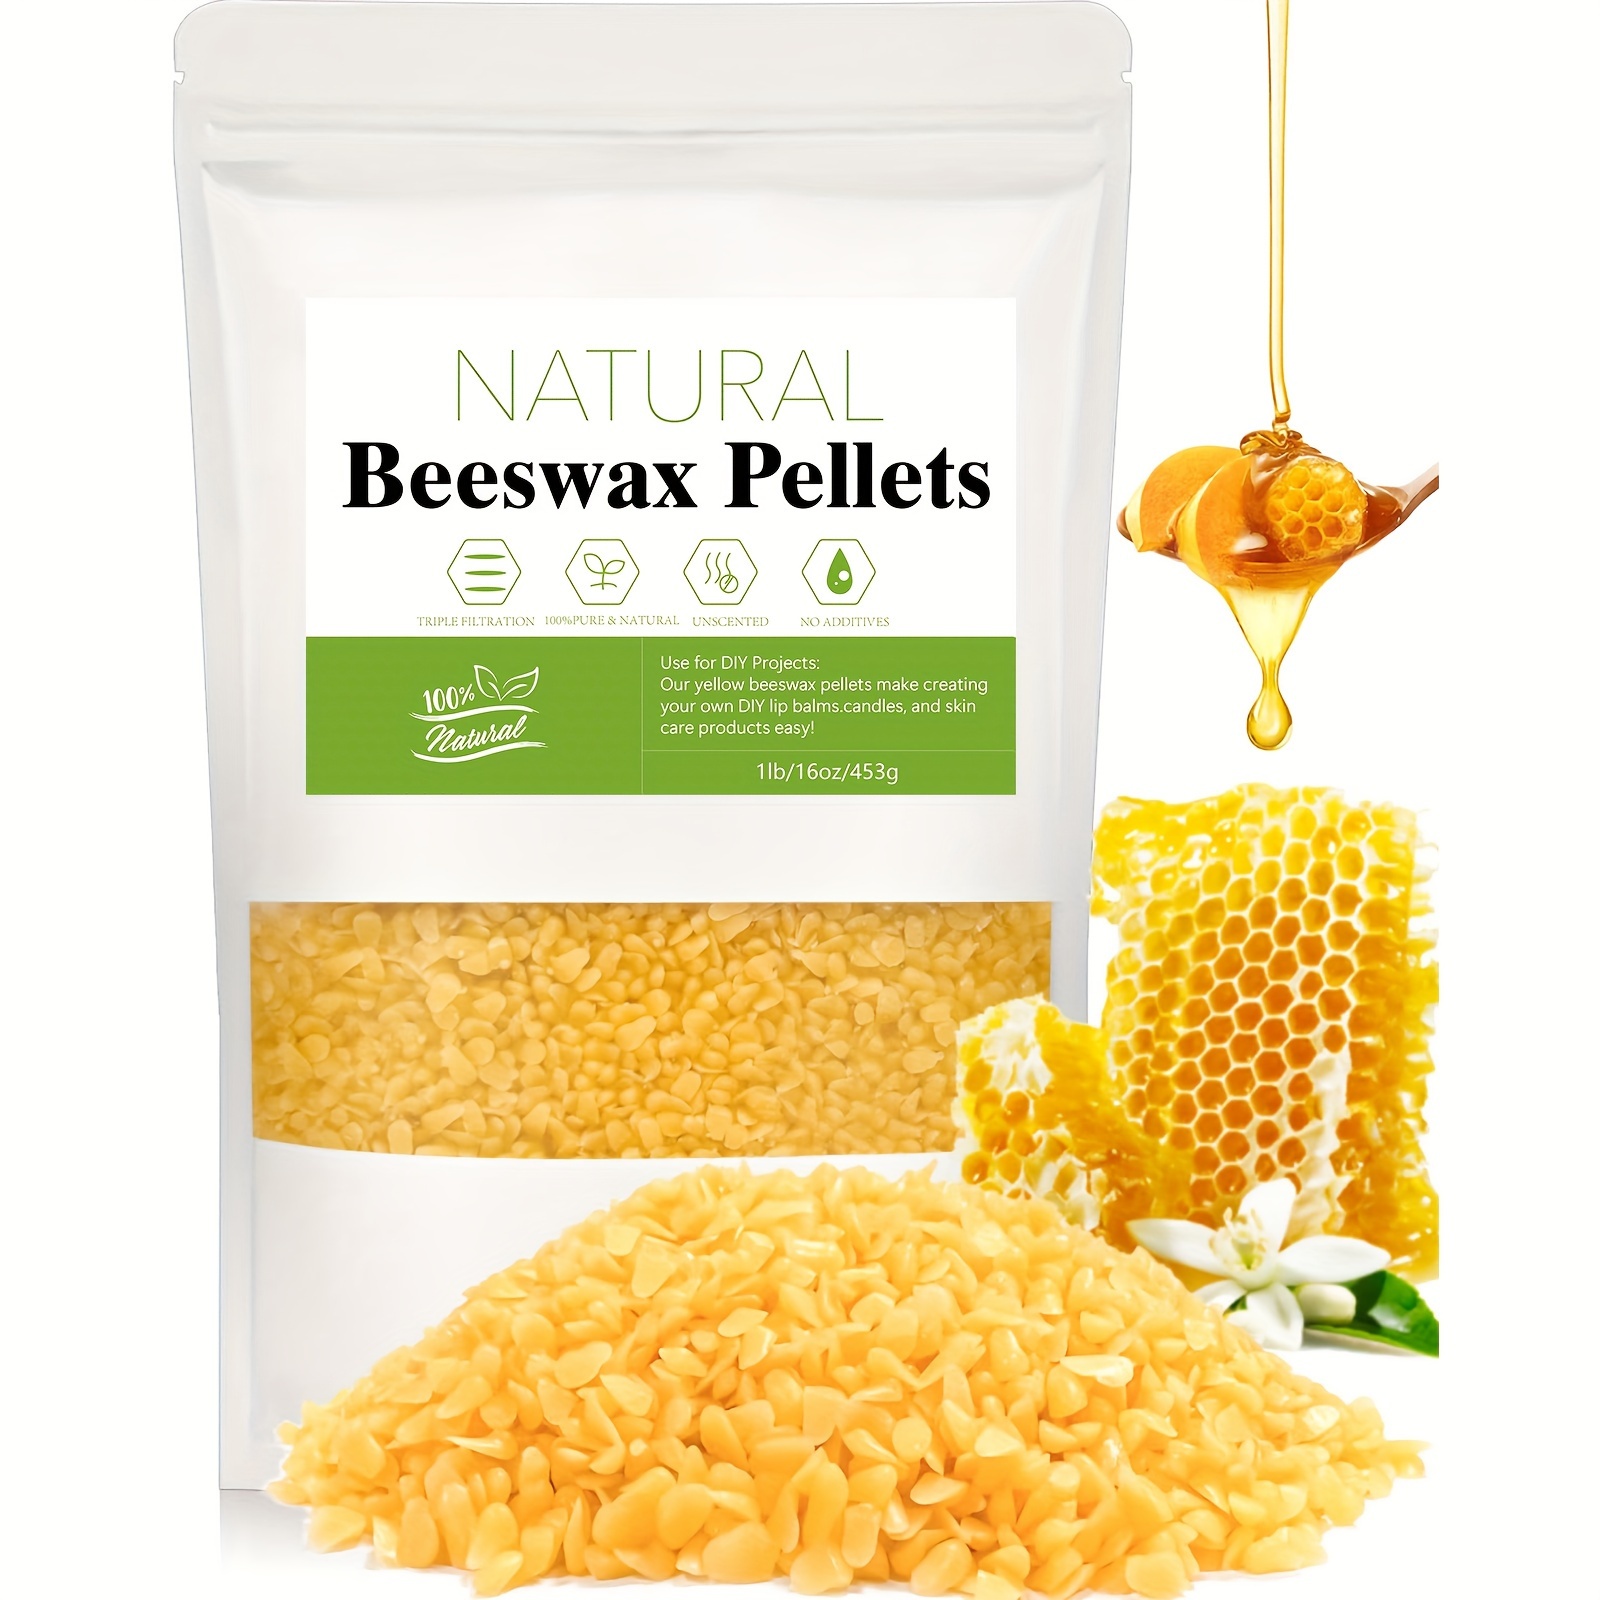 White Beeswax Pastilles, Beeswax Pellets for Candle Making, DIY Projects (6  LB)